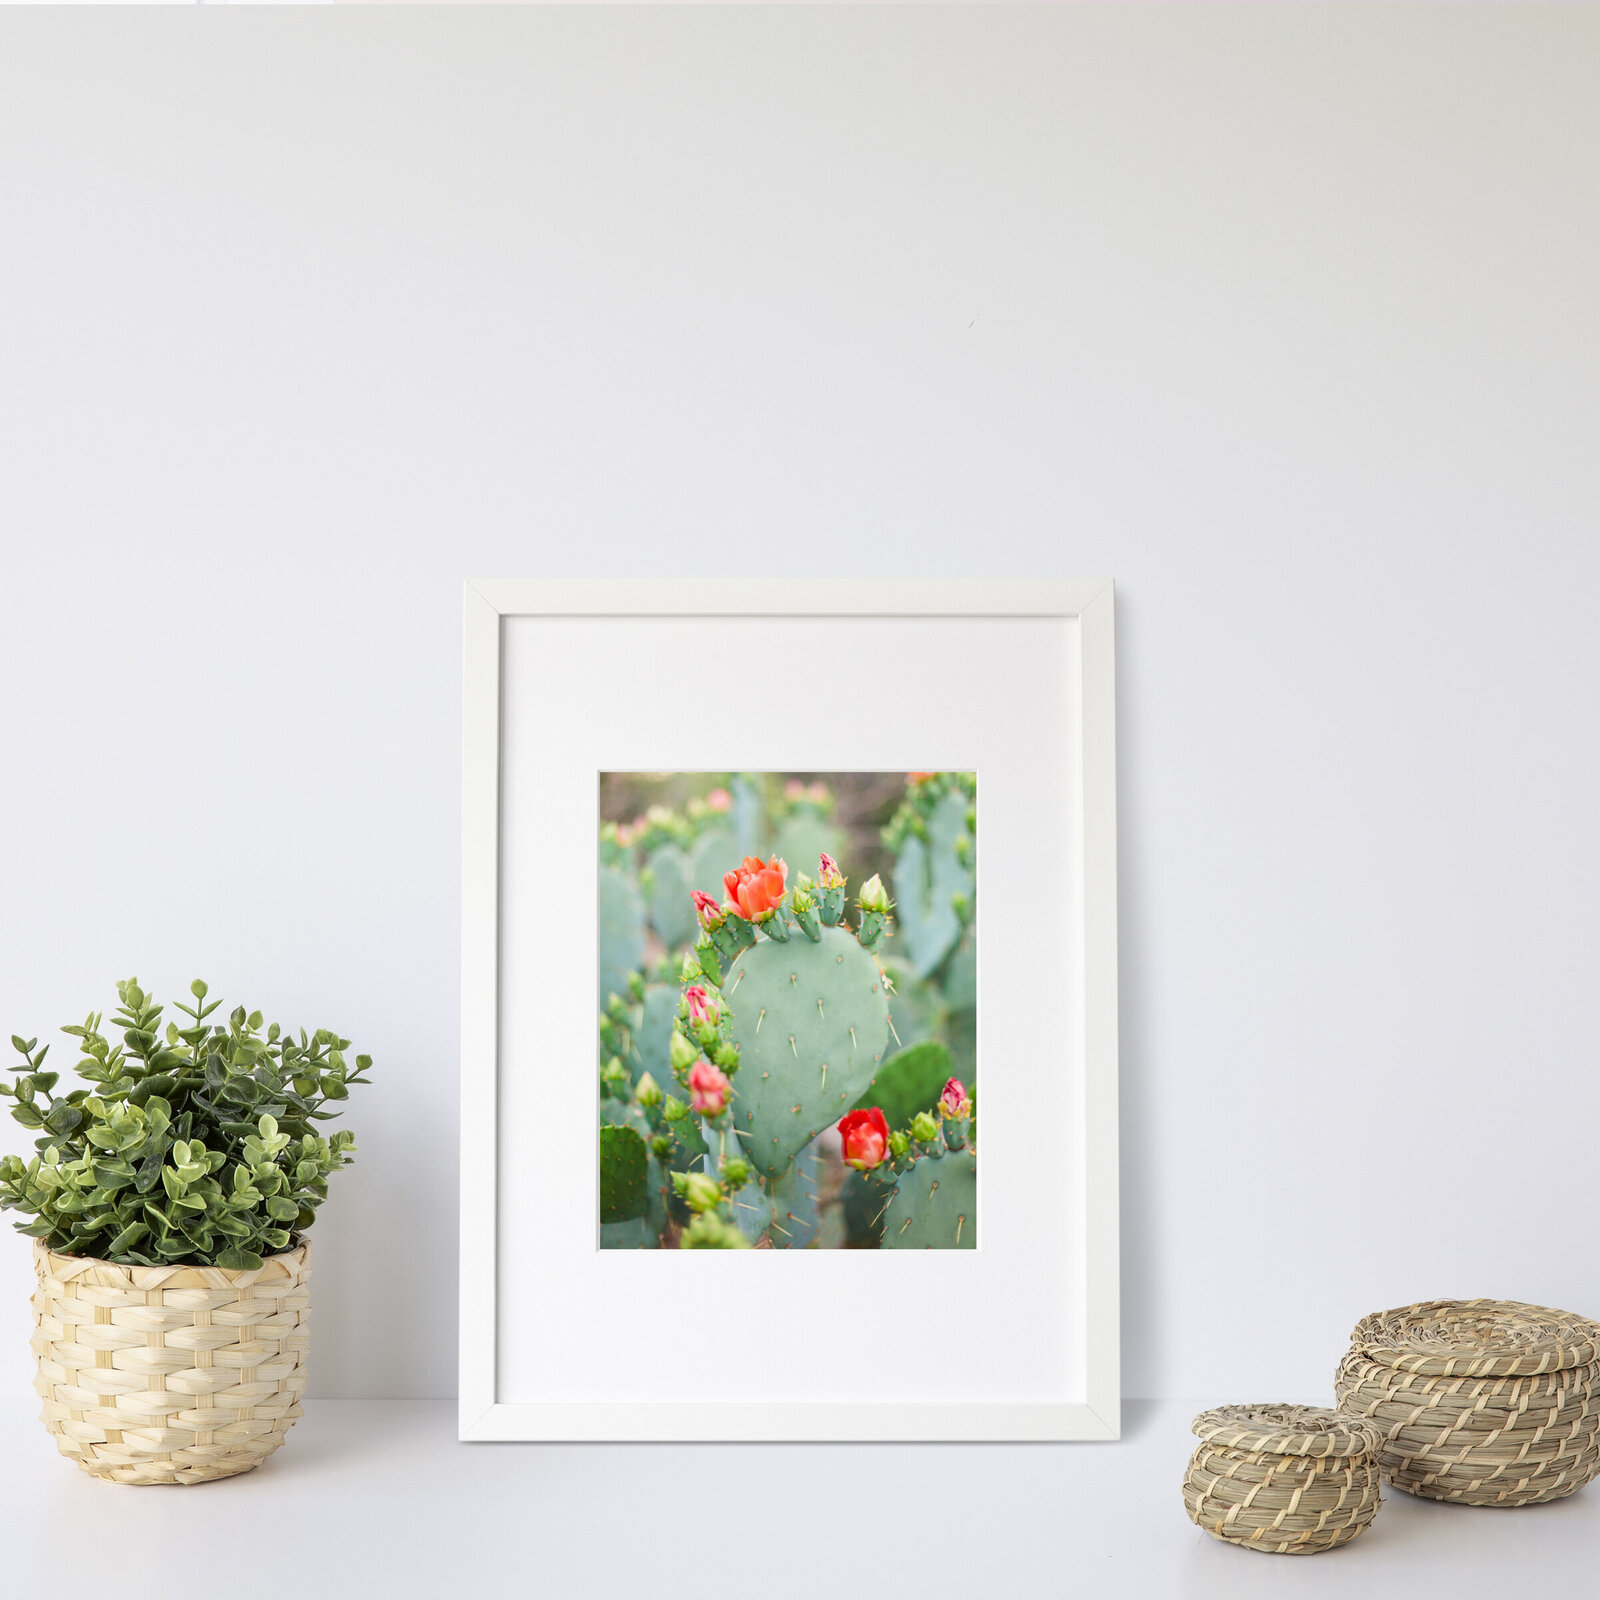 Arizona cactus with flowers home decor print for office